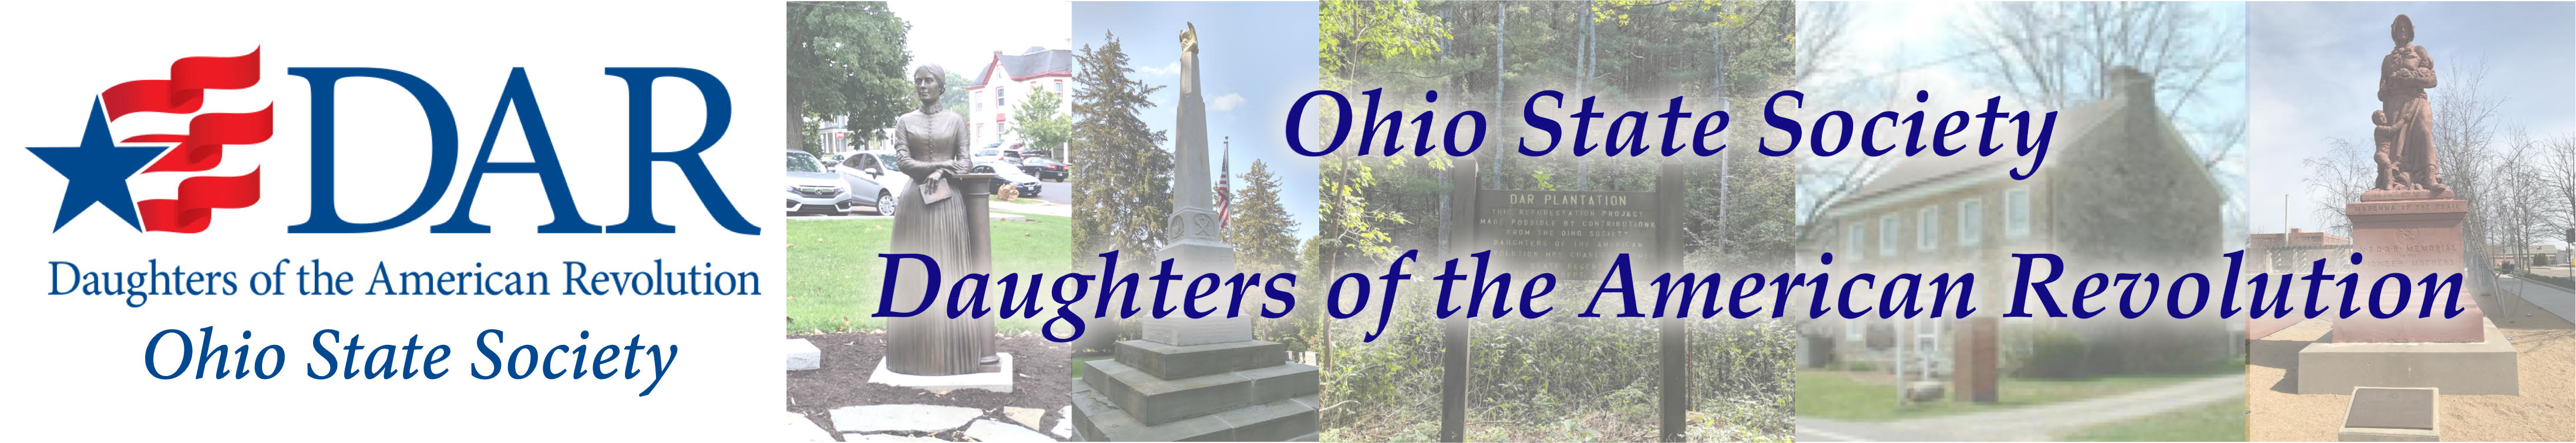 Ohio Society Daughters of the American Revolution